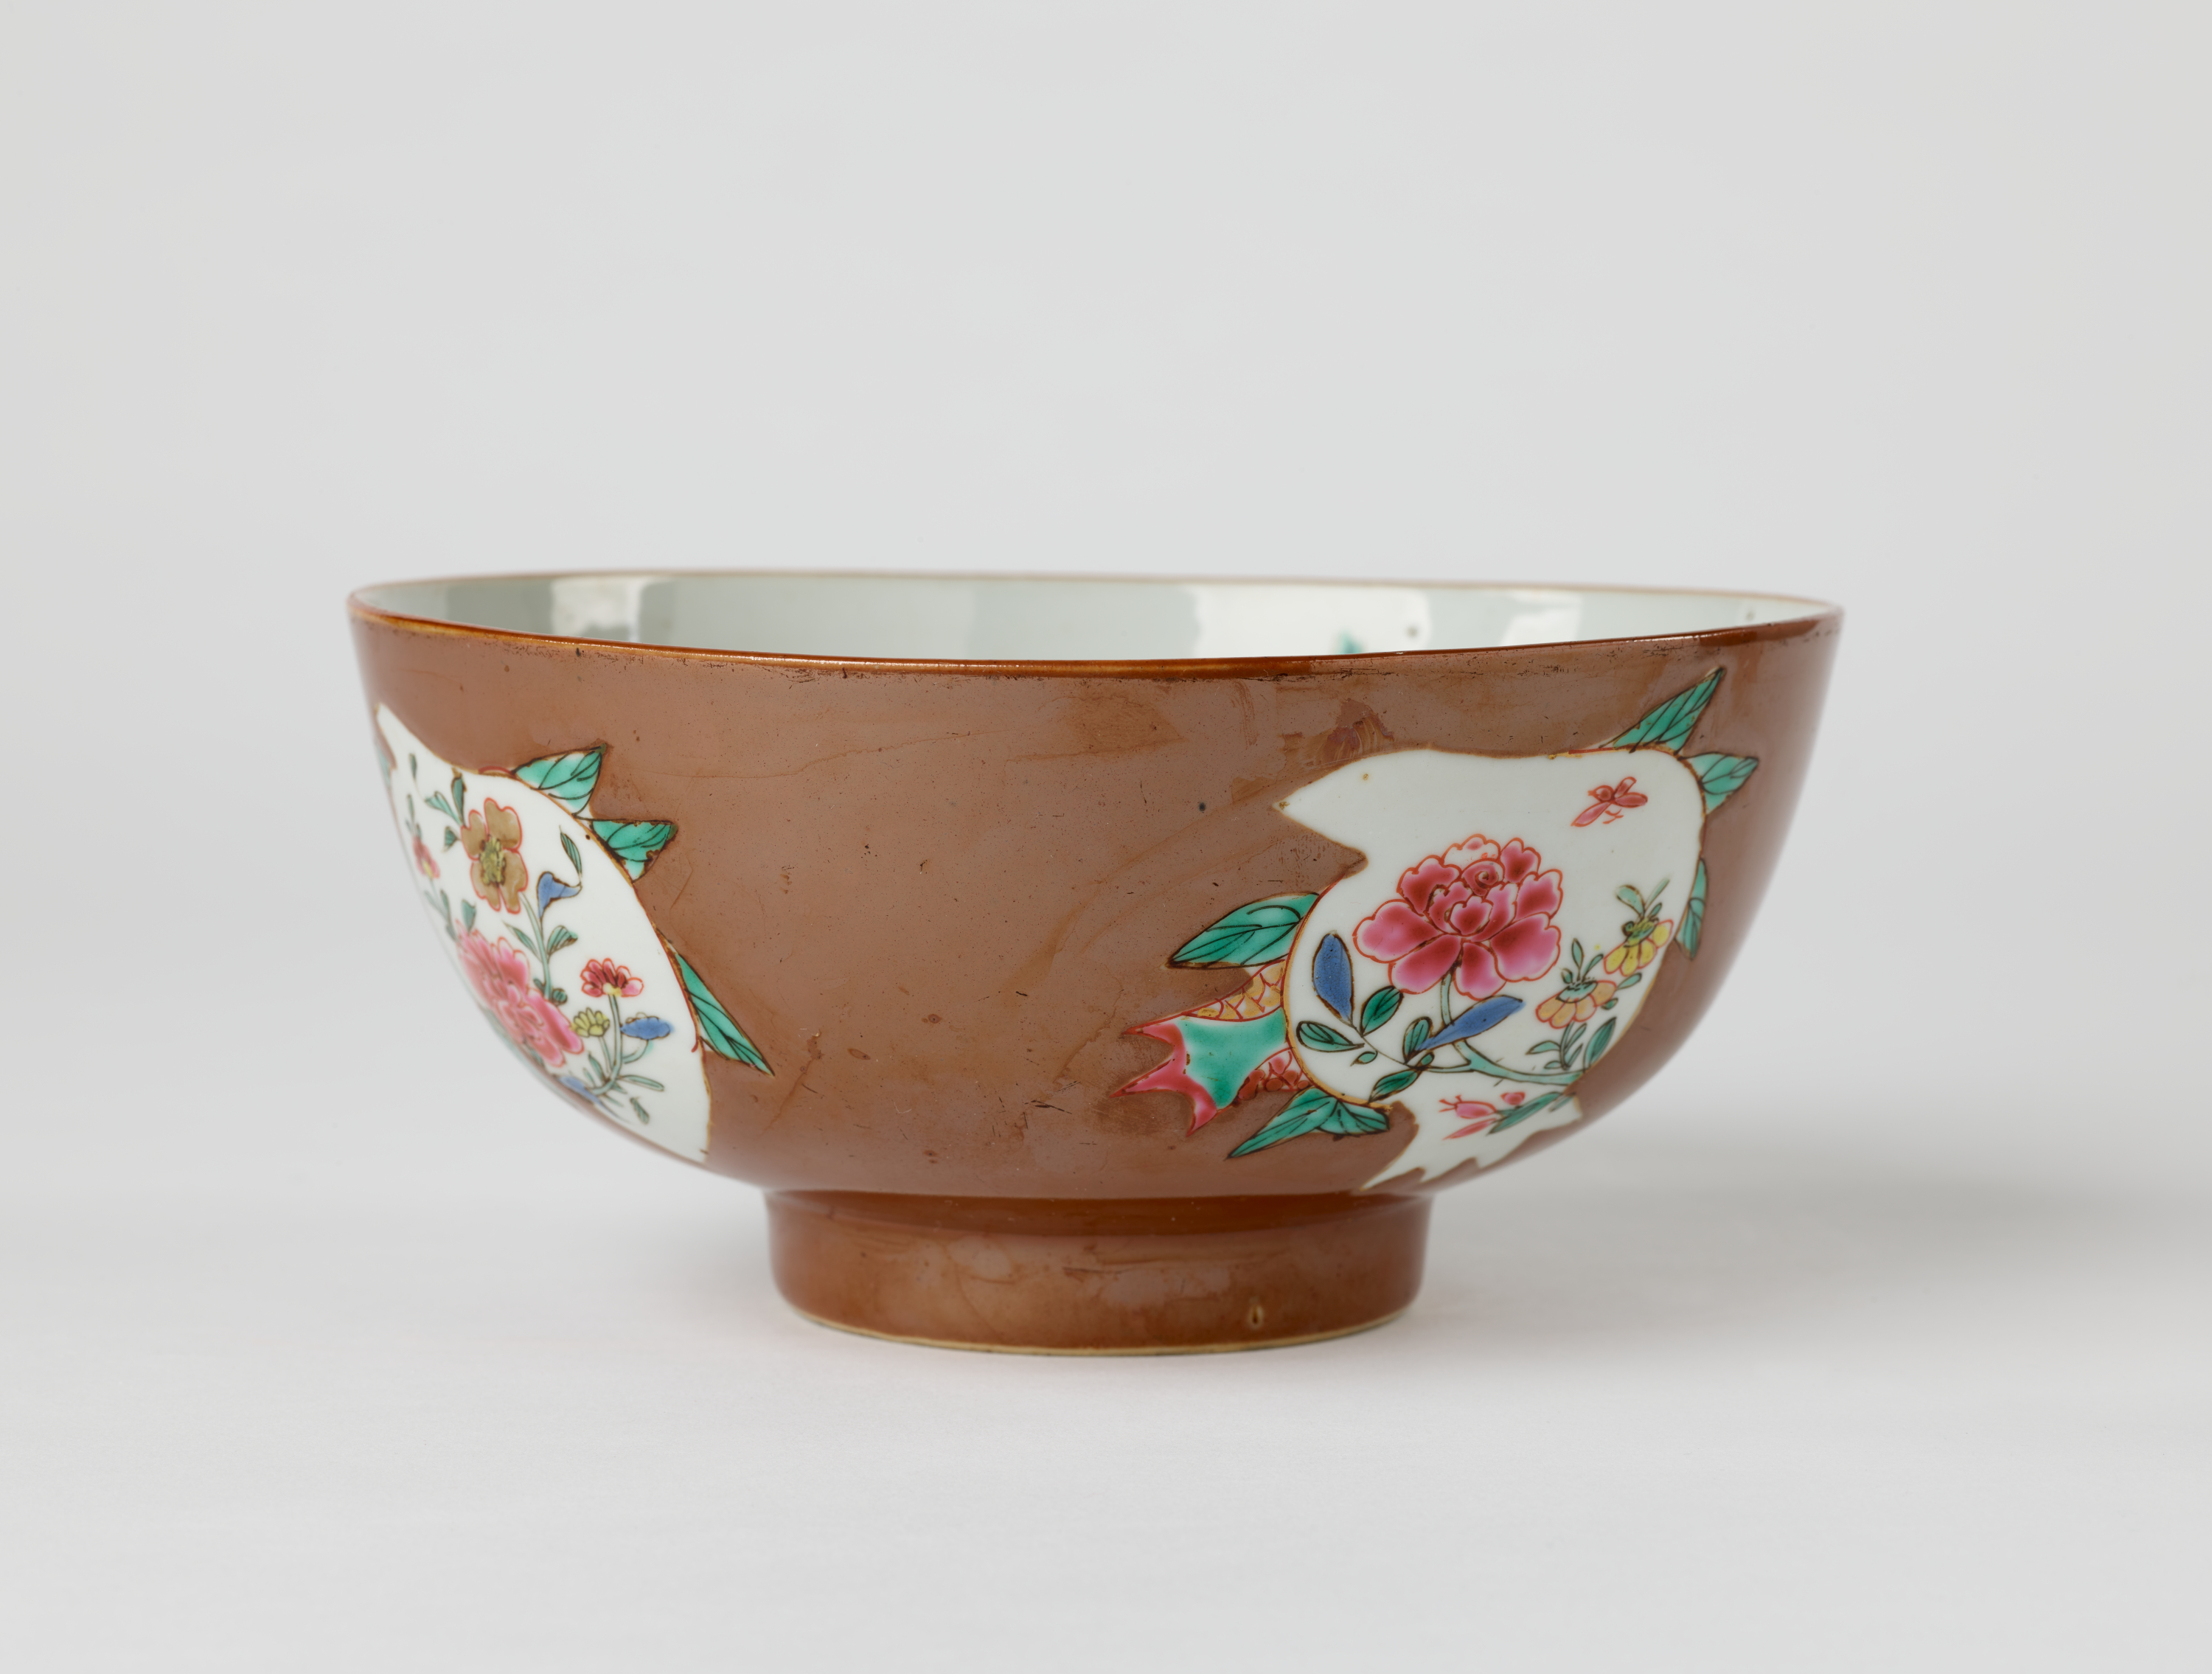 /A%20white%20and%20brown%20ceramic%20bowl%20with%20green%2C%20yellow%2C%20and%20pink%20floral%20decorations%20with%20a%20short%2C%20small%20foot.